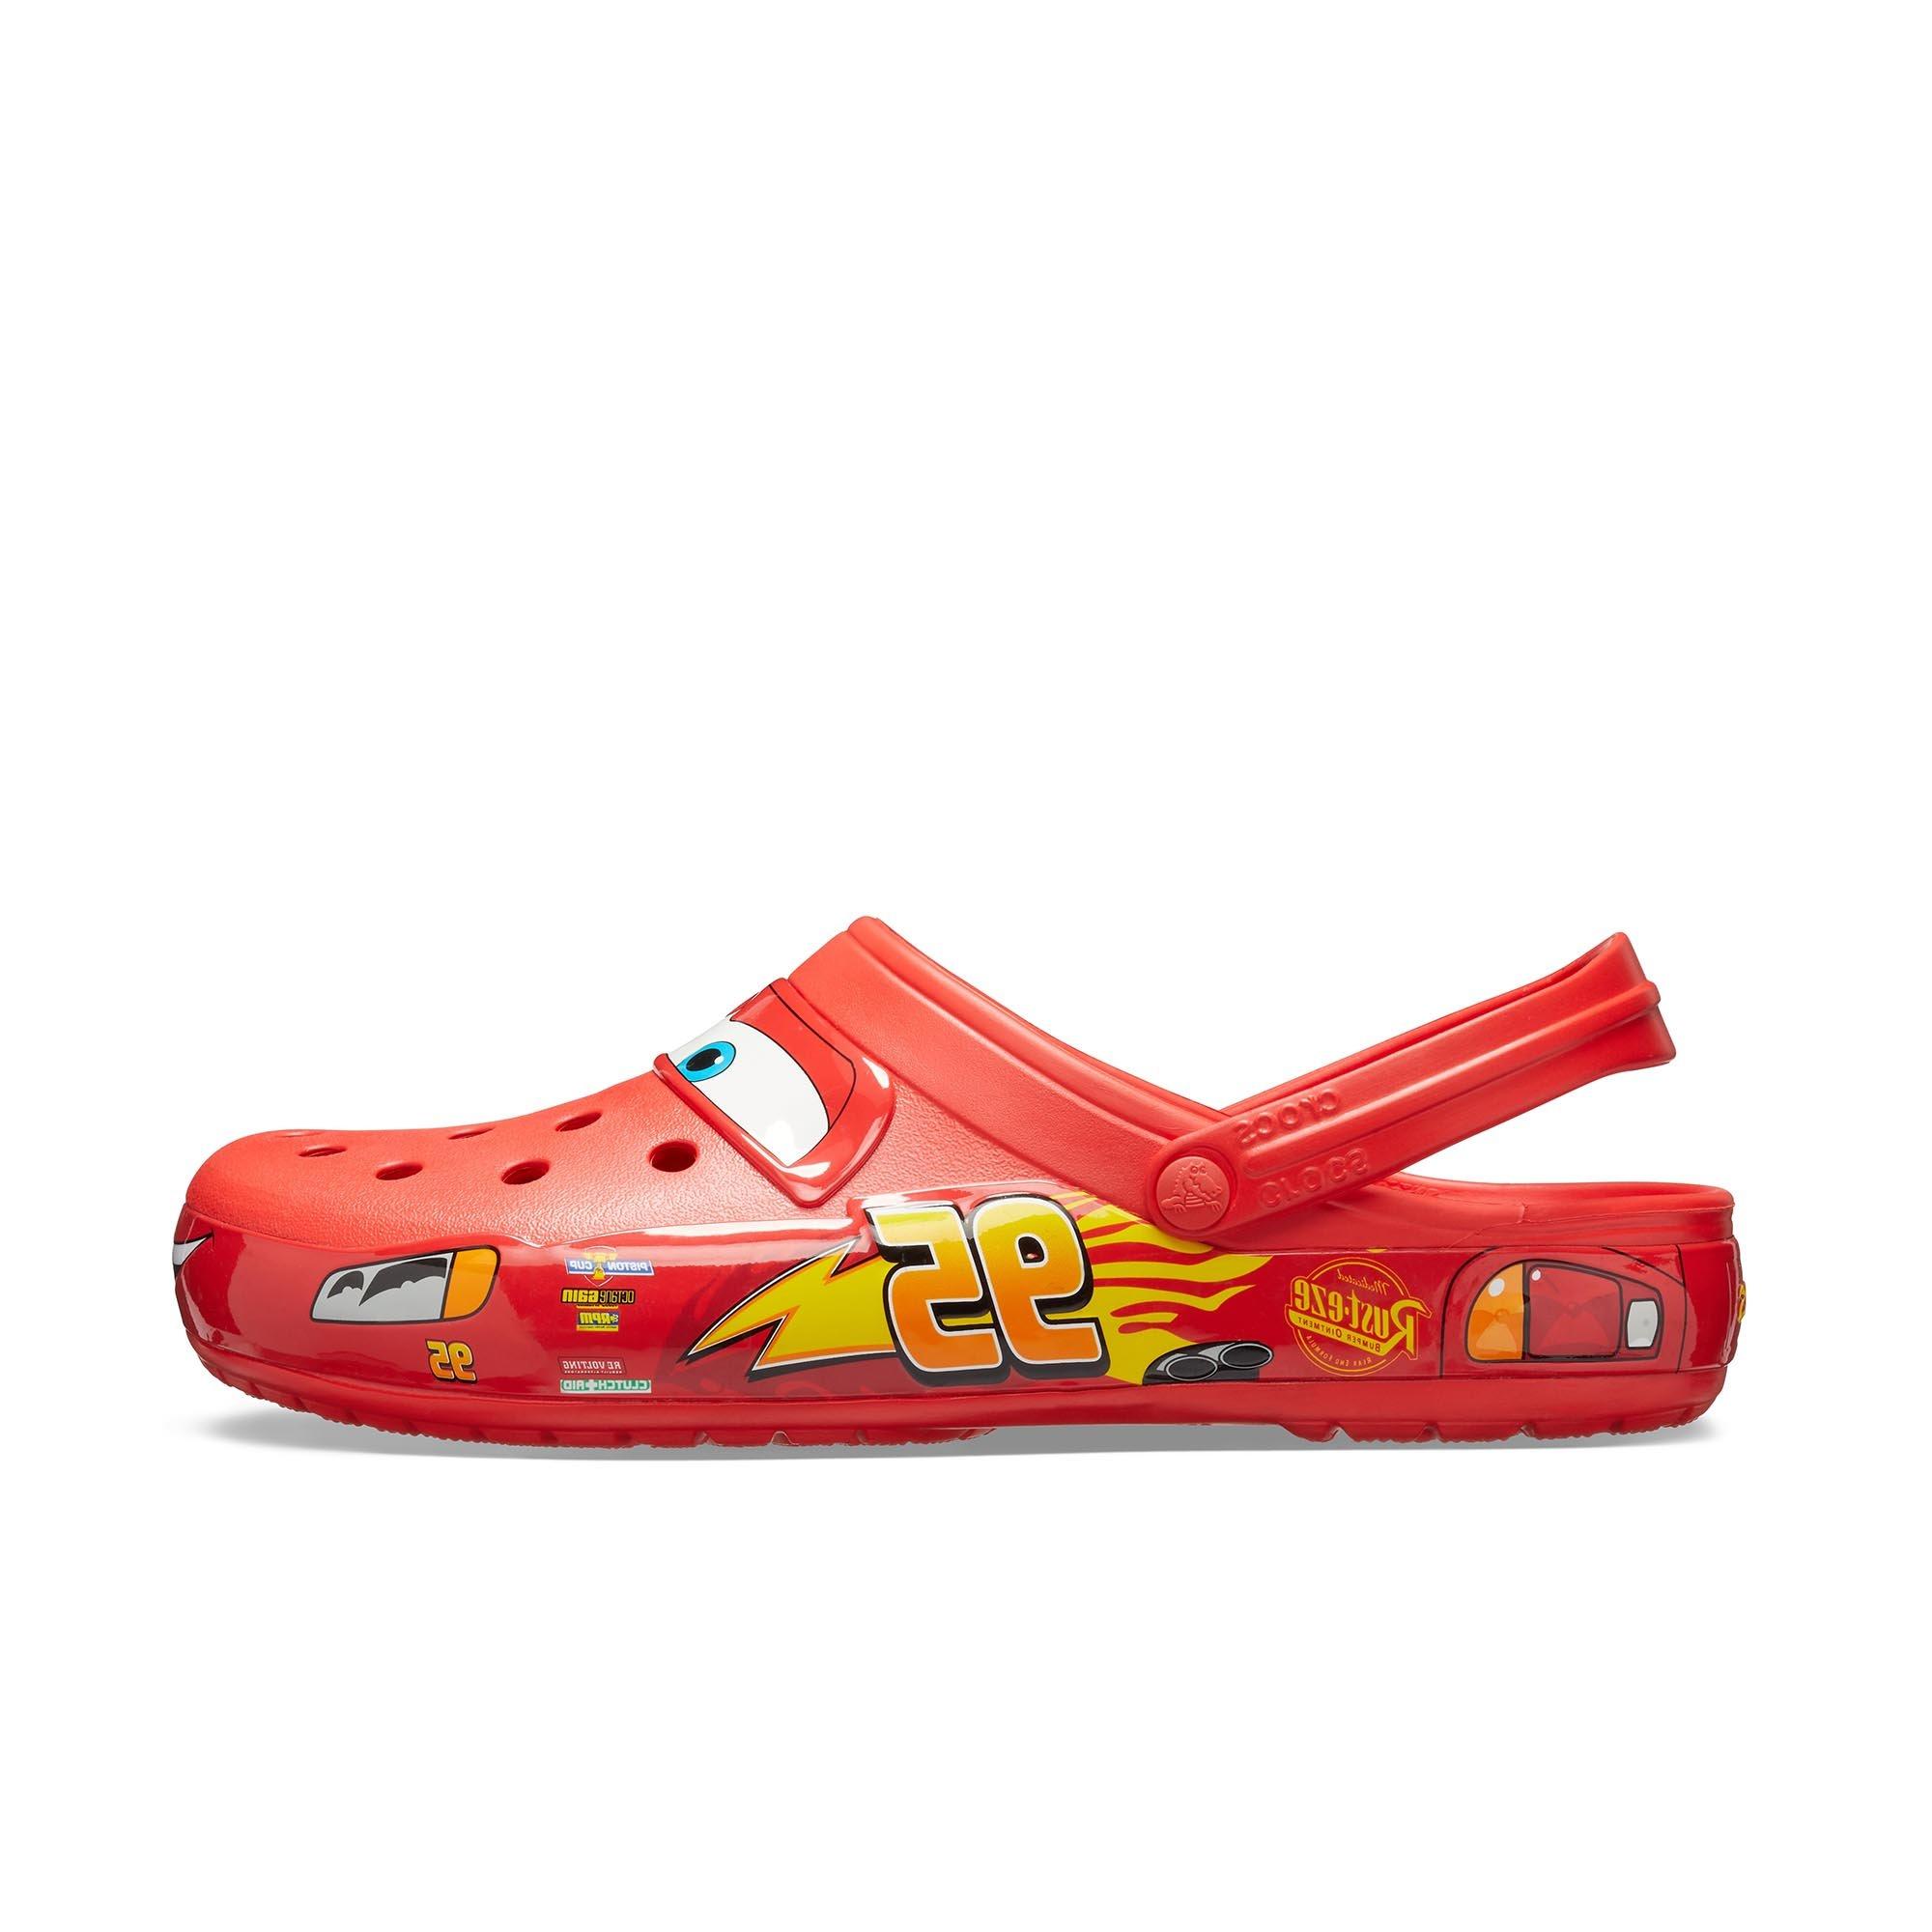 The Internet is Losing Its Cool Over the Lightning McQueen Crocs